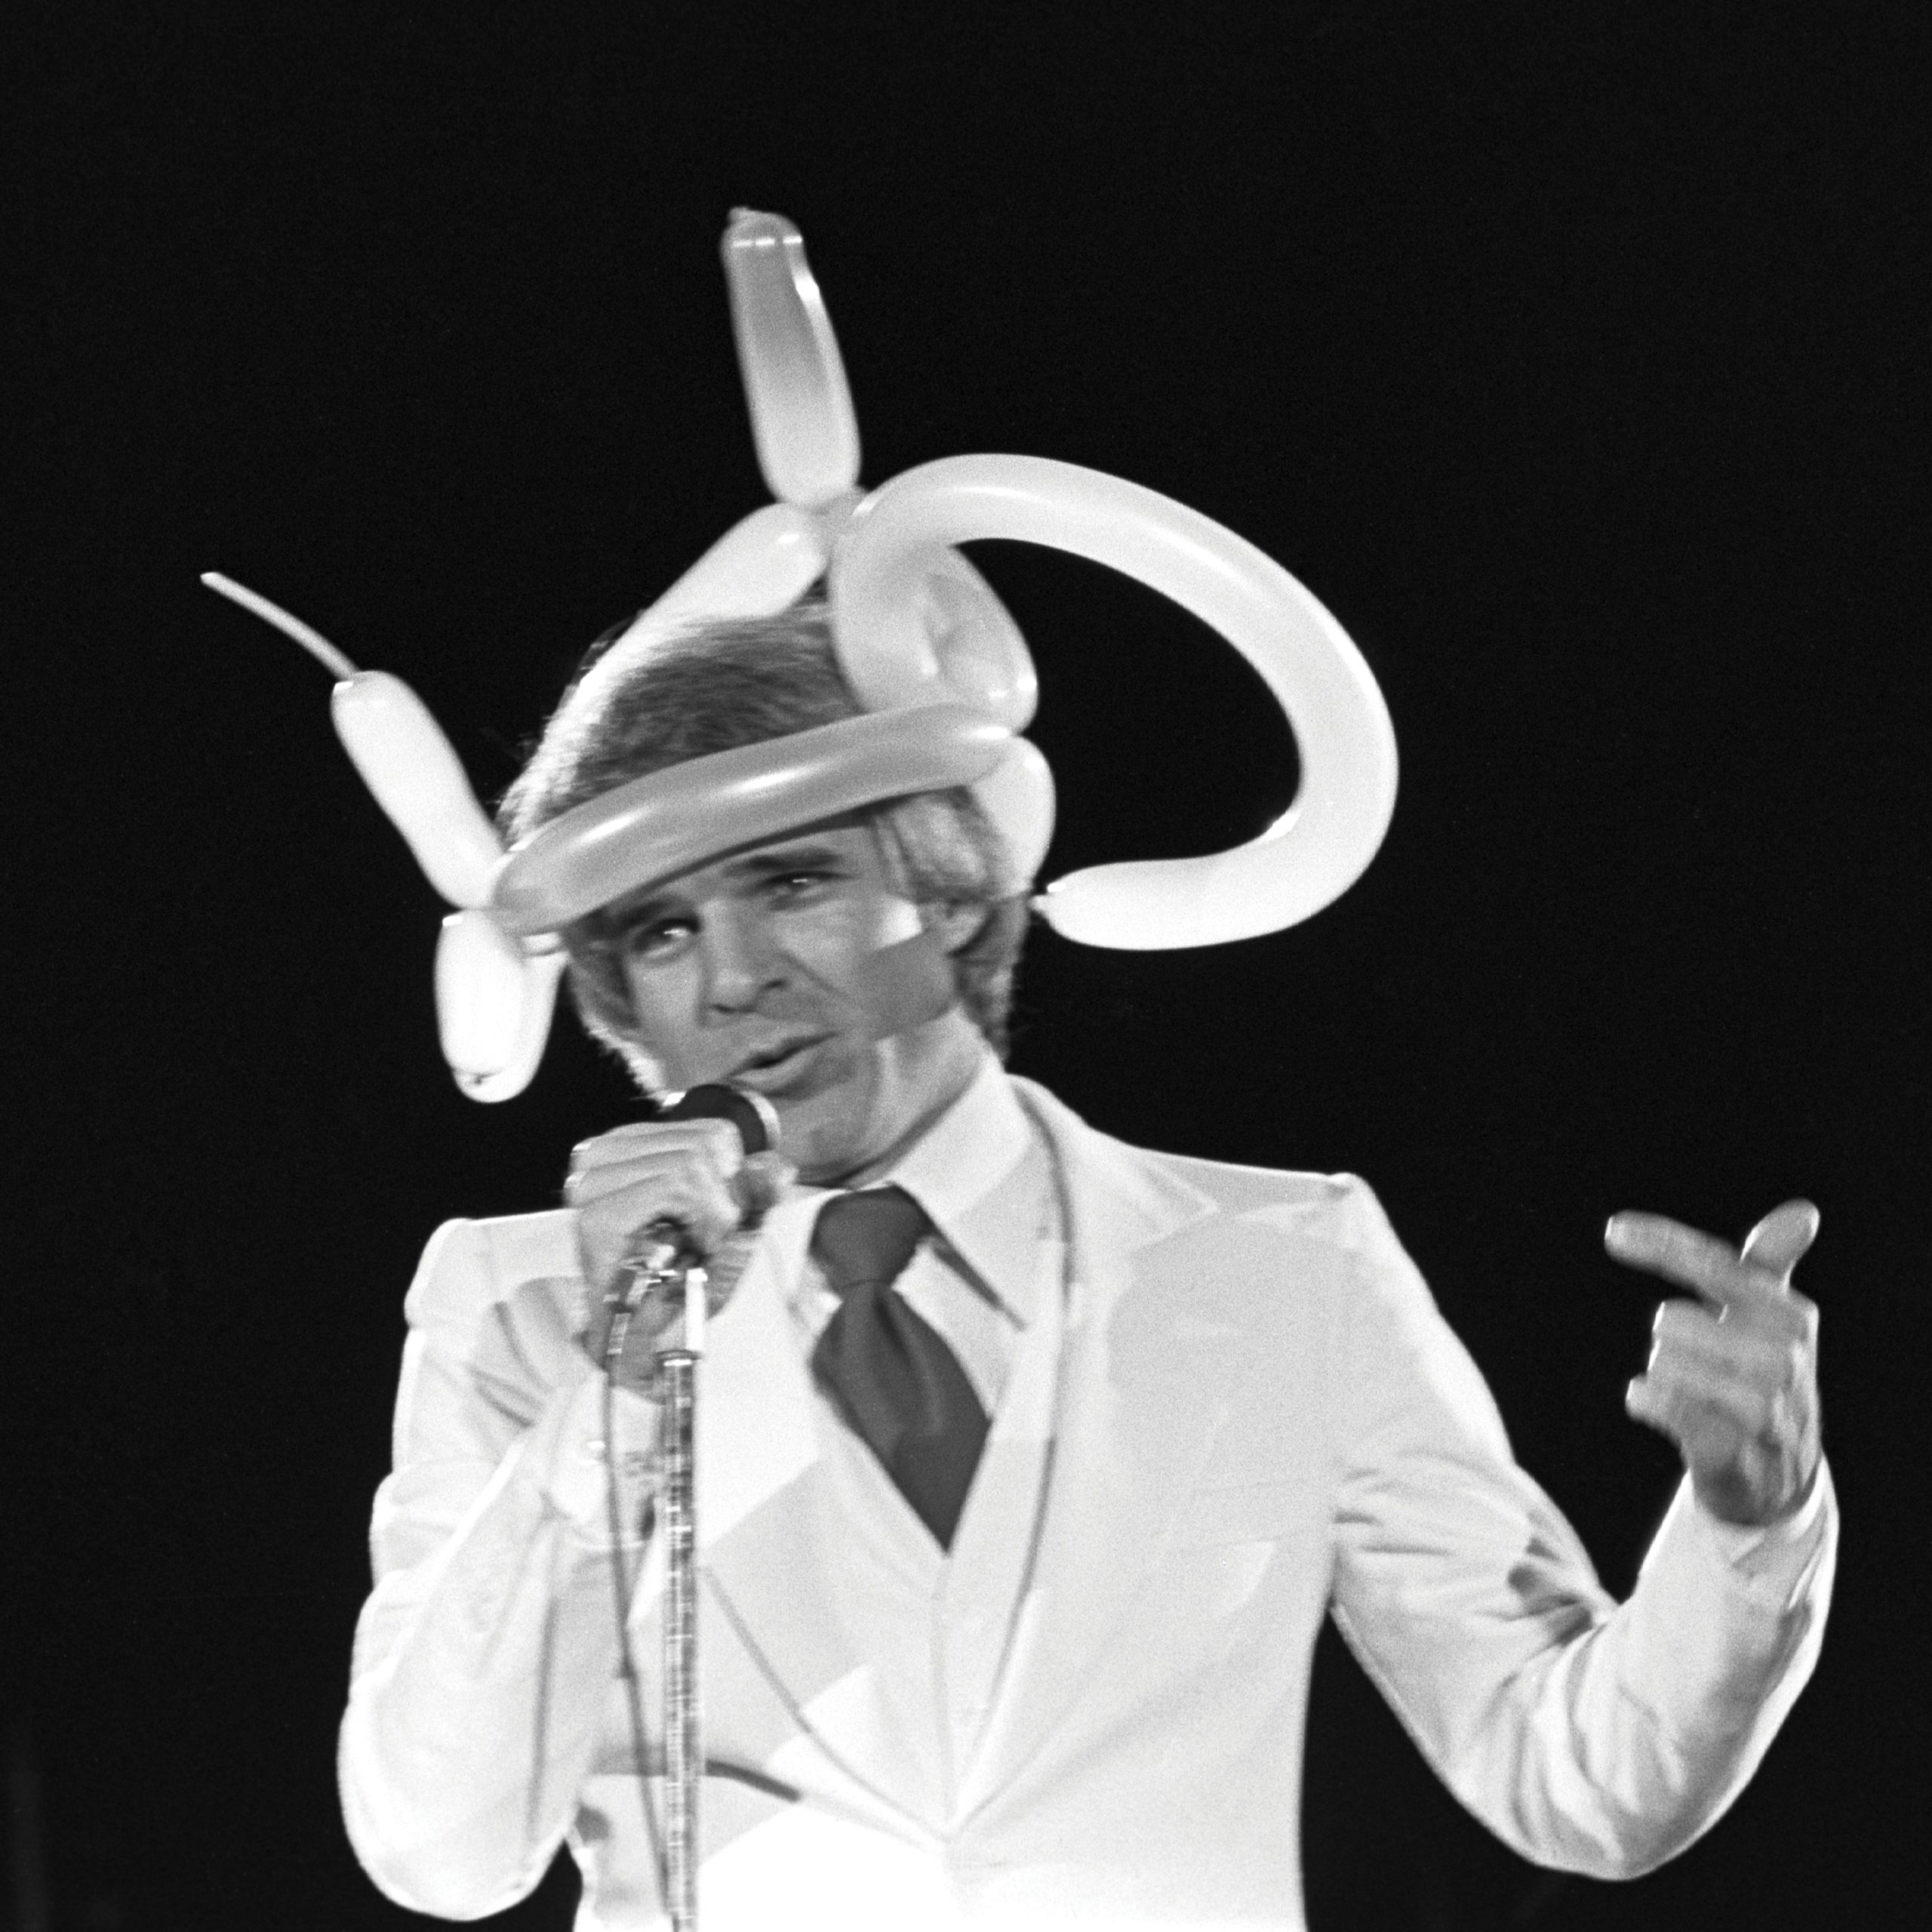 A black and white photo of a comedian wearing a balloon hat.